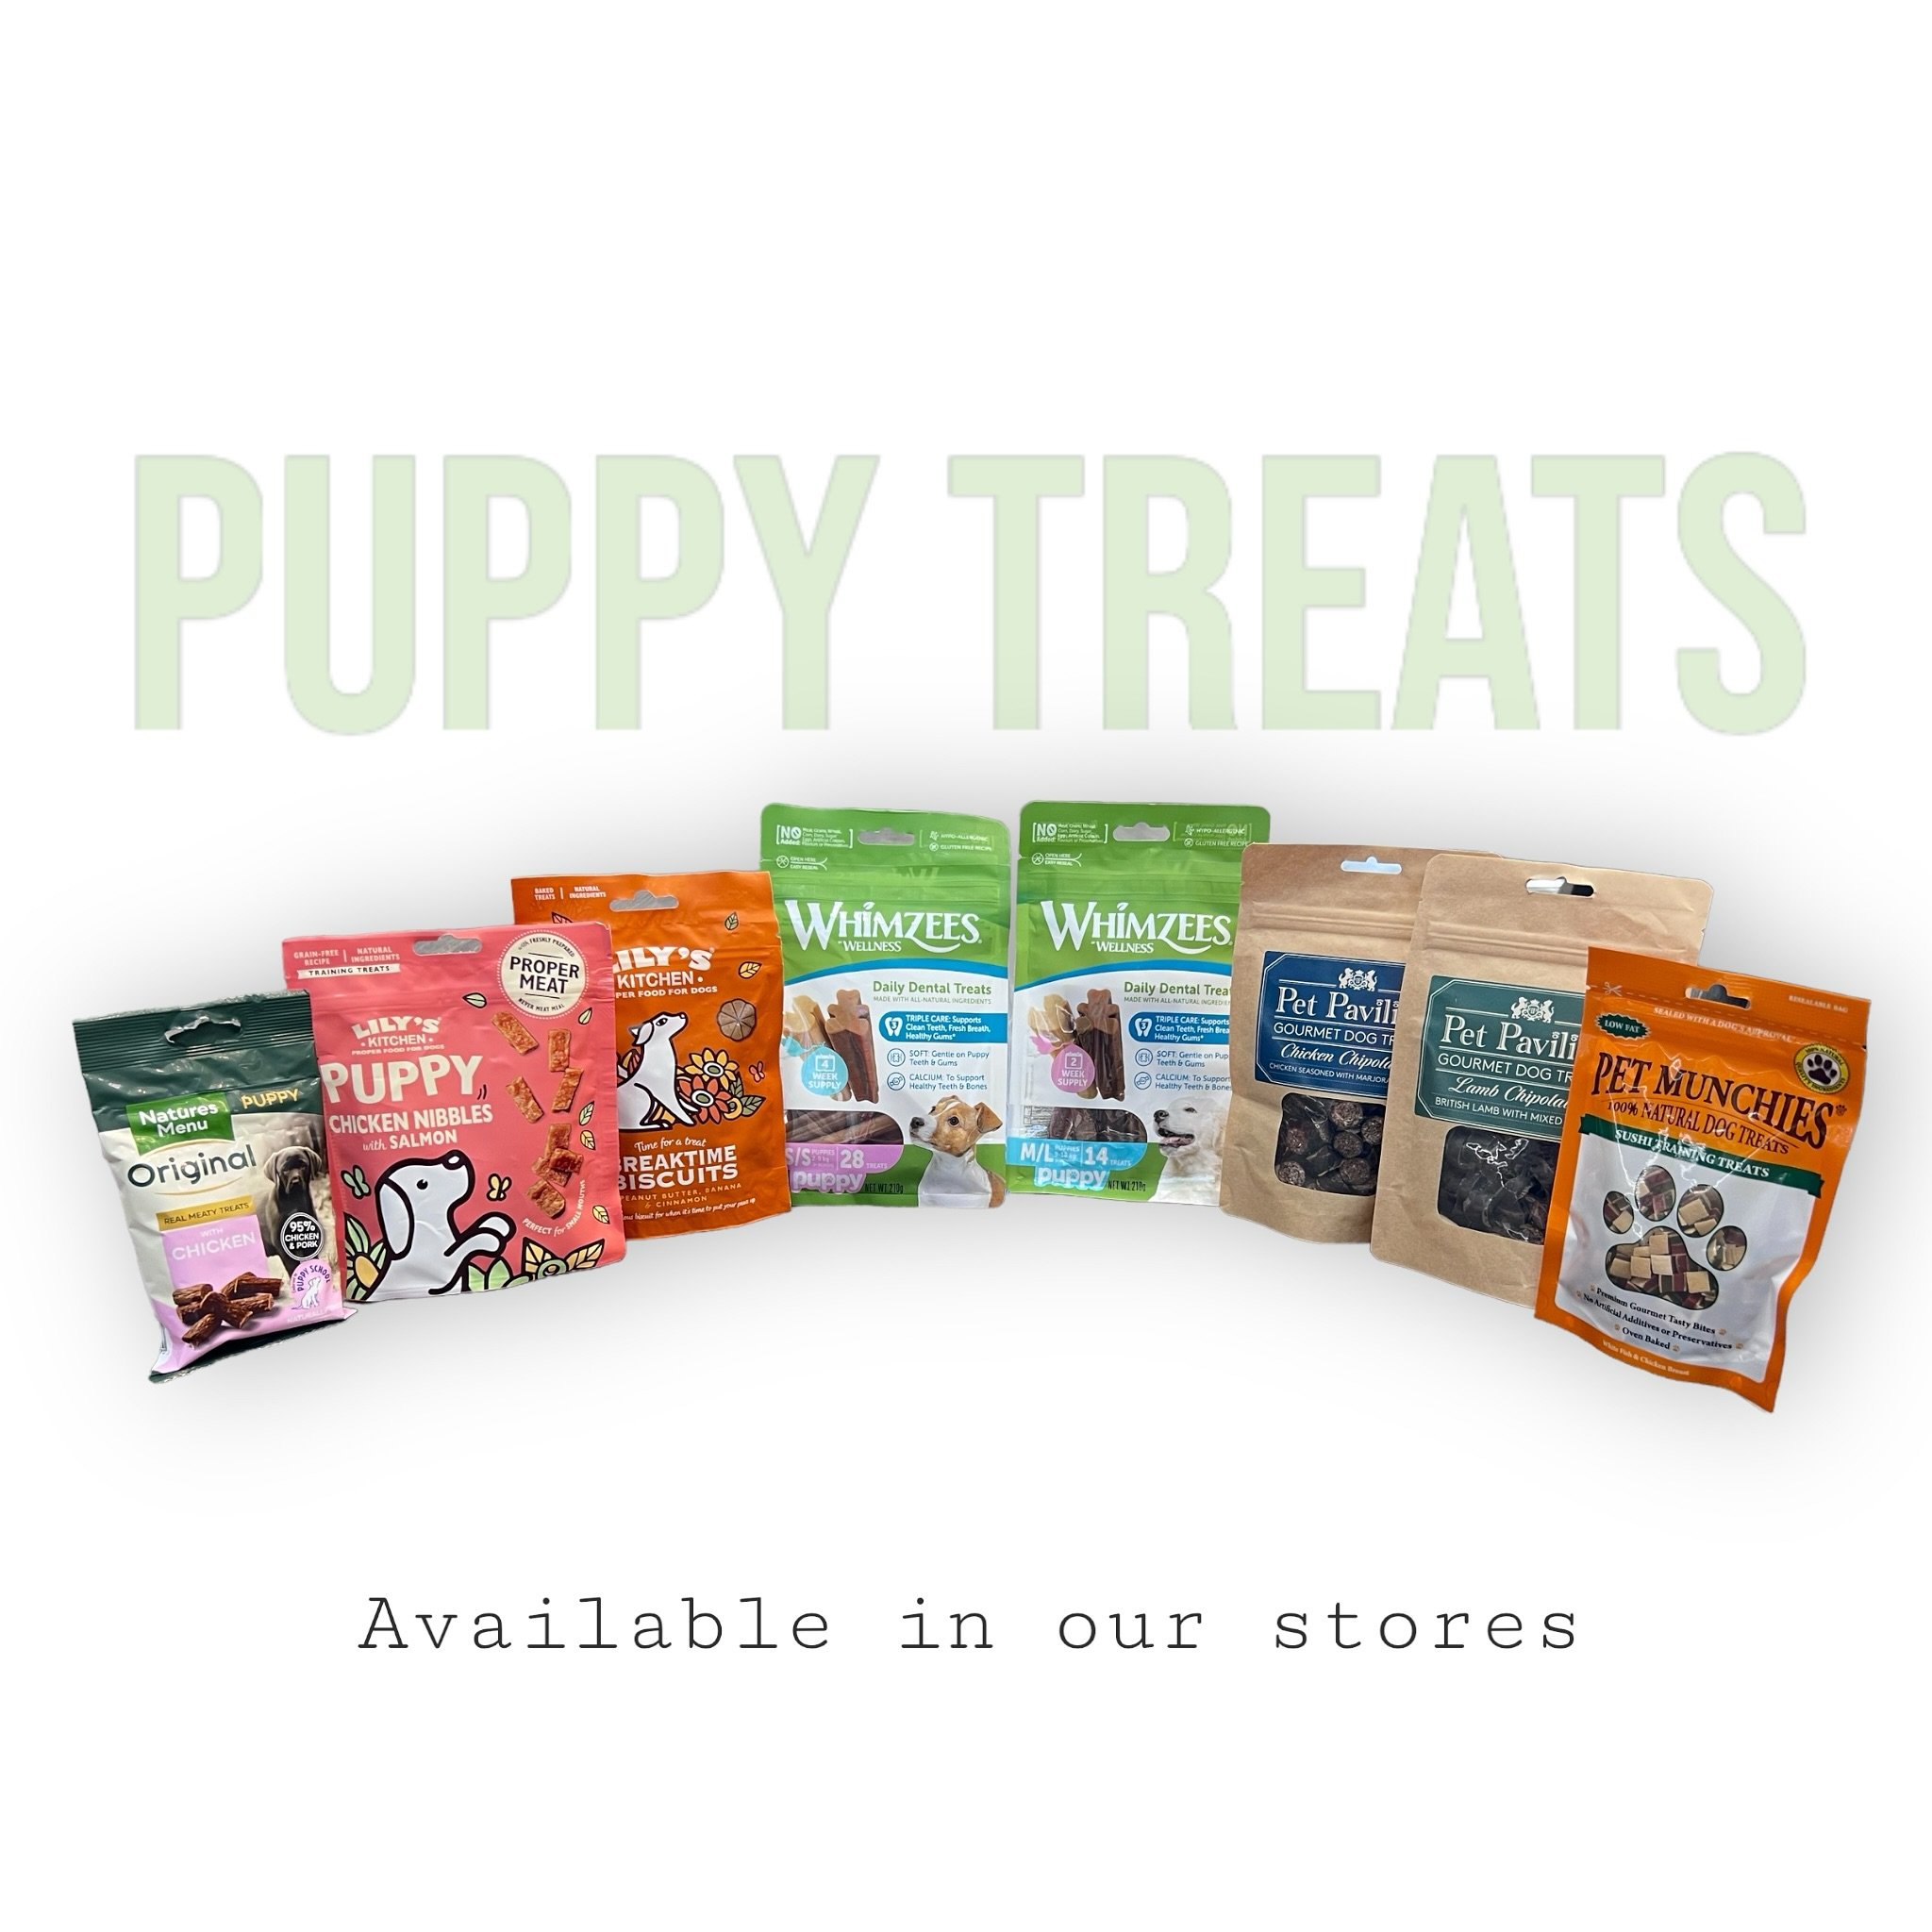 🐶🐾Treat your furry friend to some tail-wagging goodness with our selection of puppy treats!🐾🍖These delicious bites are packed with all the good stuff to keep tails wagging and puppy kisses coming!
.
.
.
#petpavilion #puppytreats #happypuppies #pe